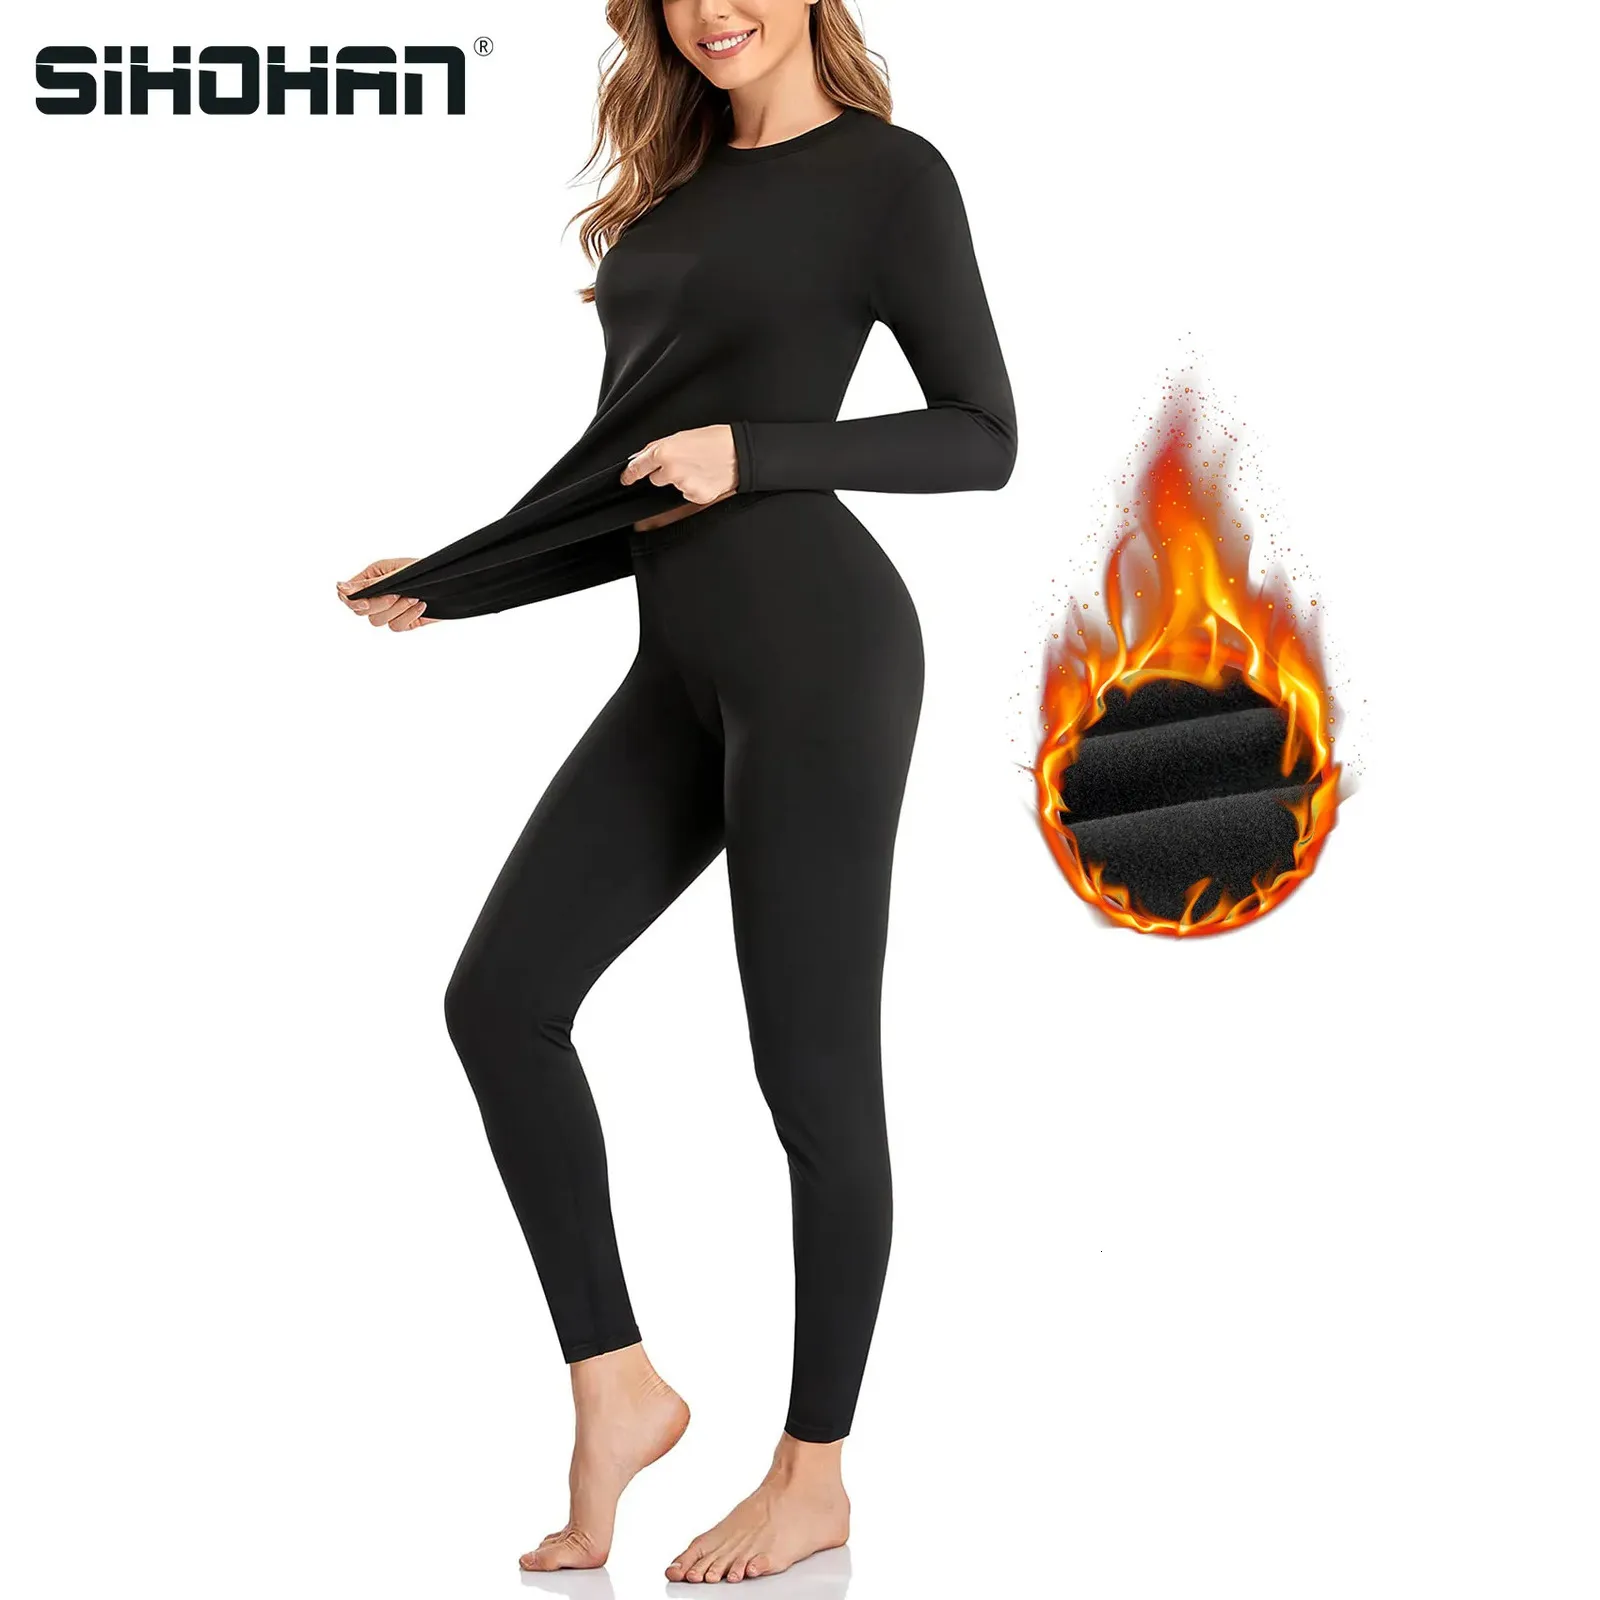 Women's Thermal Underwear Thermal Underwear Set for Women Long-Sleeved Trousers Long Johns Thermal Underwear Ladies Suit Winter Clothes Warm Lingerie 231122